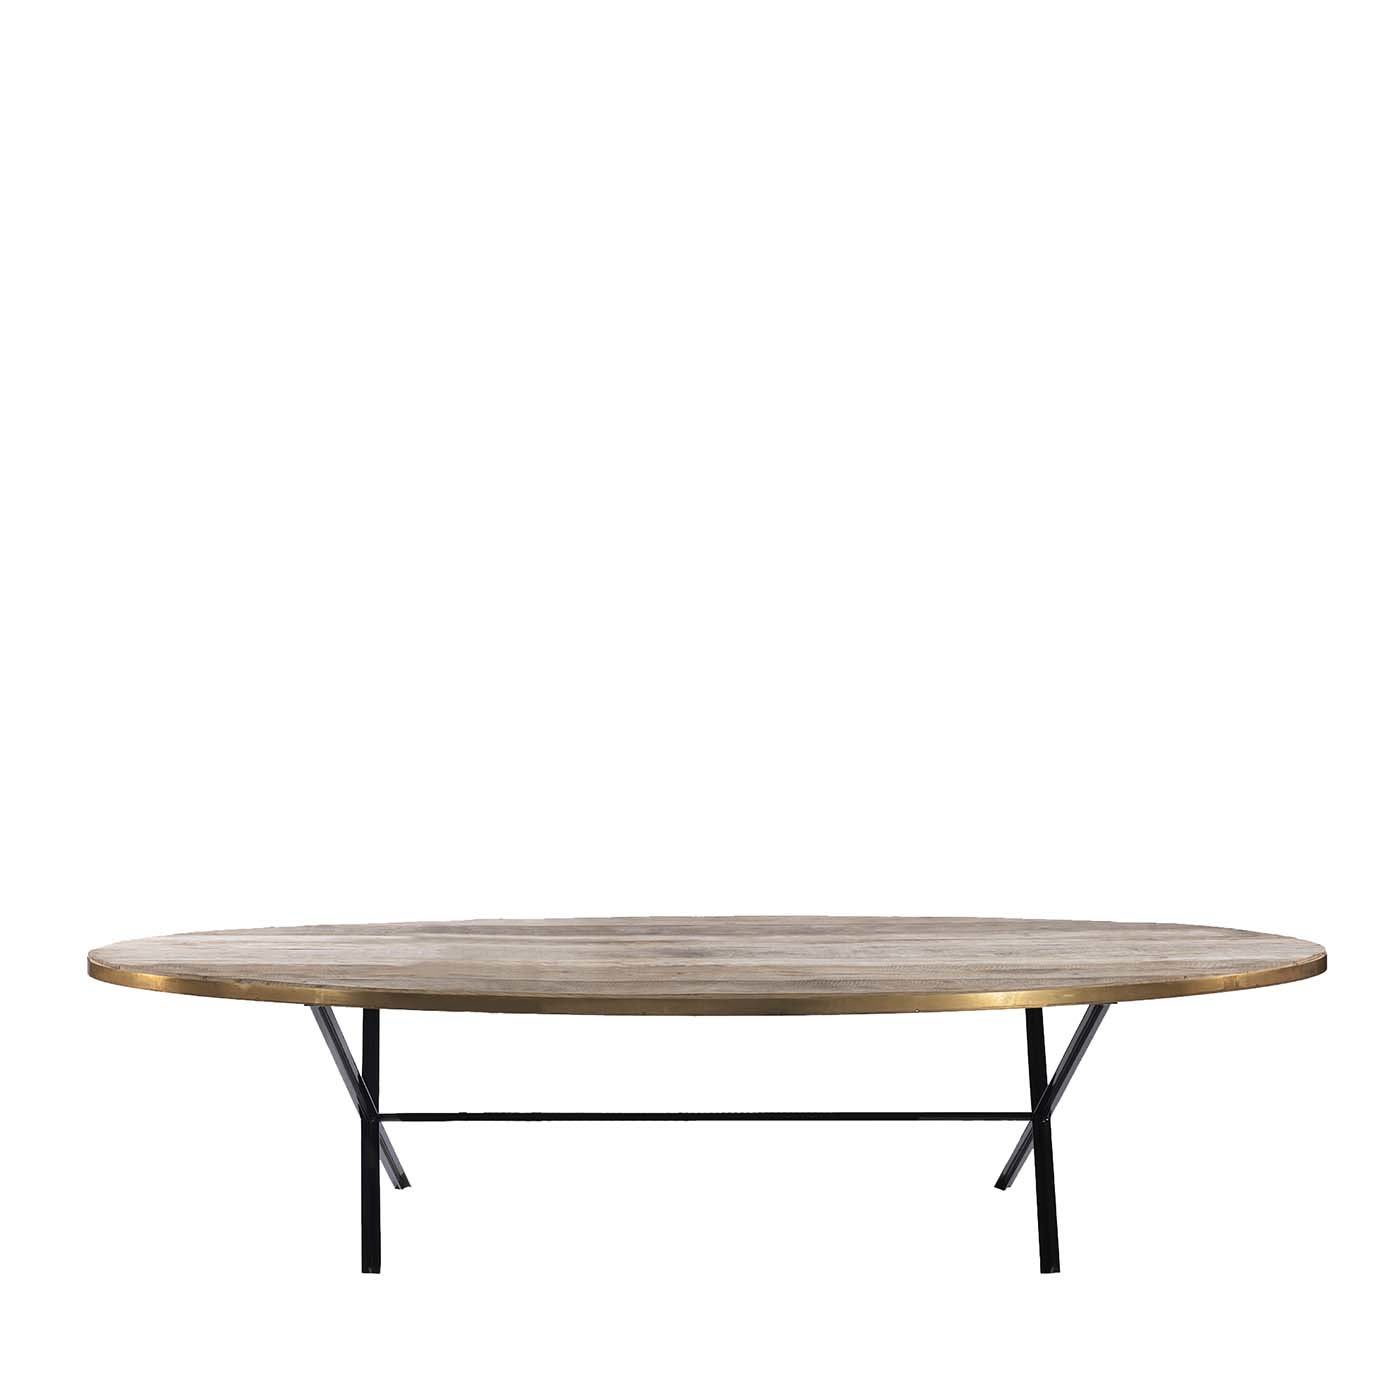 The Oval Dining Table - B.B. for Reschio